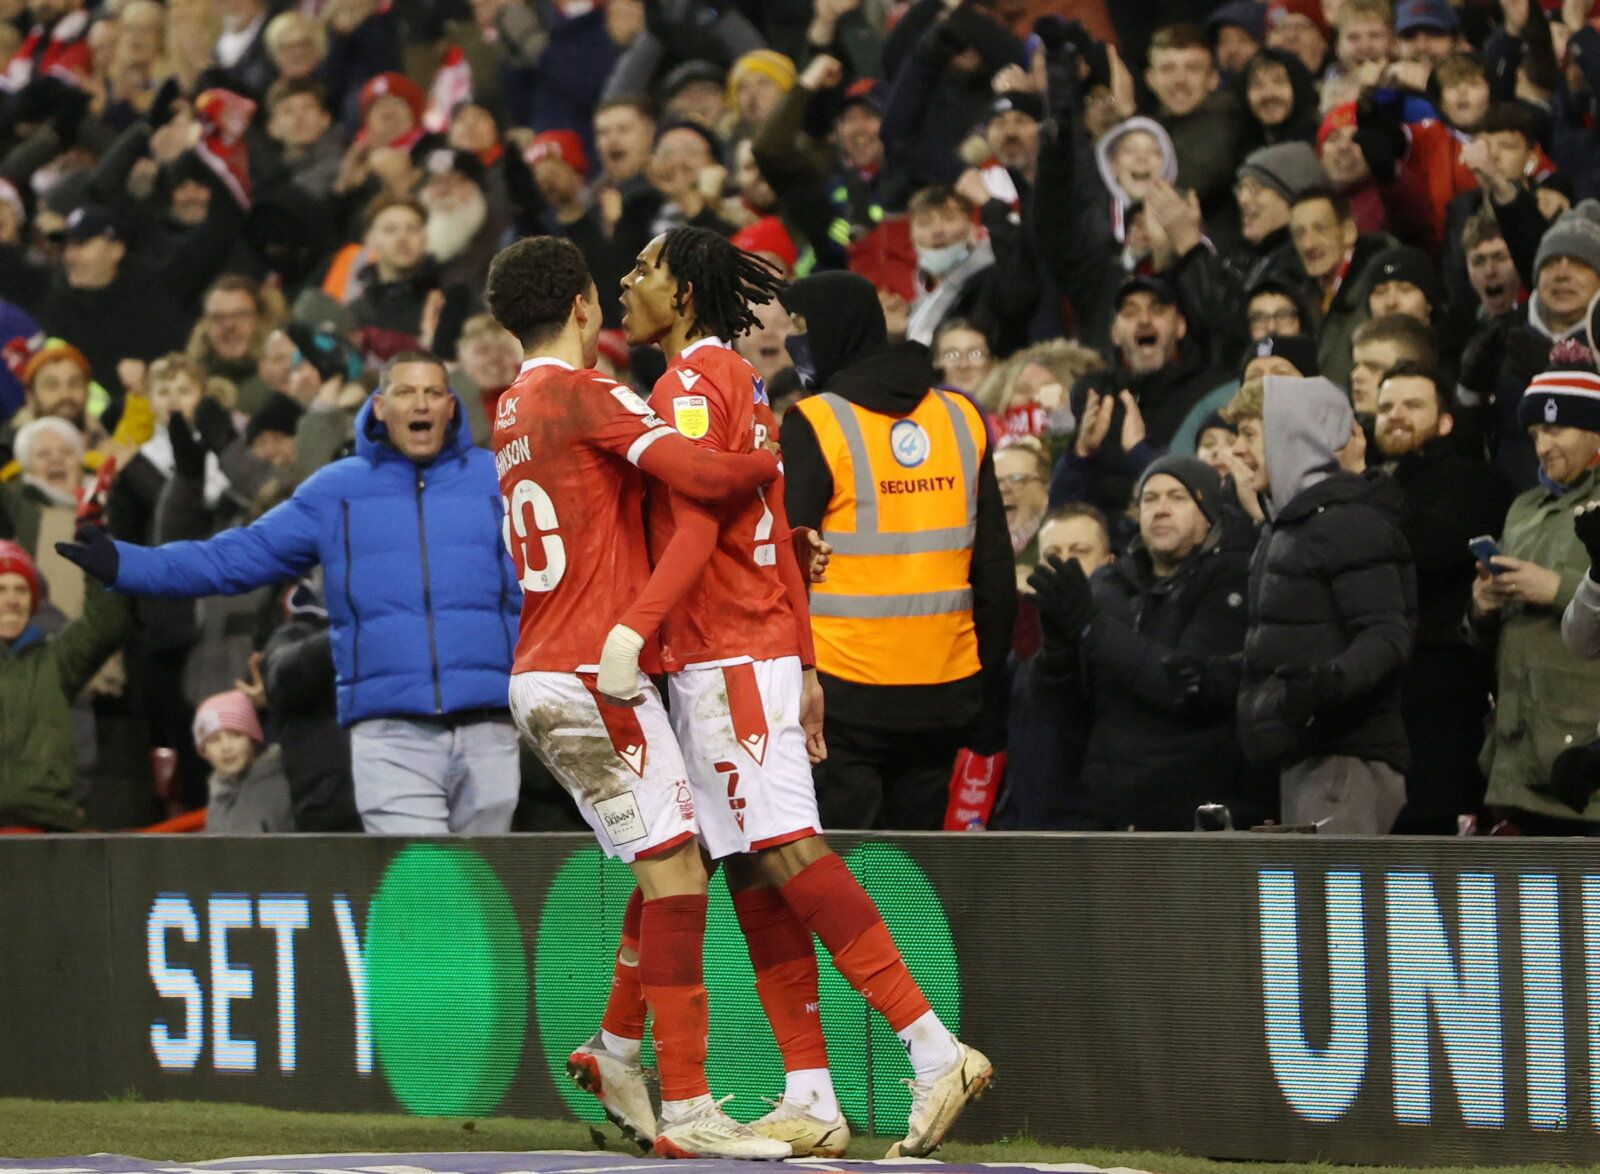 Soccer Football - Championship -  Nottingham Forest v Barnsley - City Ground, Nottingham, Britain - January 25, 2022  Nottingham Forest's Brennan Johnson celebrates scoring their third goal    Action Images/Molly Darlington    EDITORIAL USE ONLY. No use with unauthorized audio, video, data, fixture lists, club/league logos or 